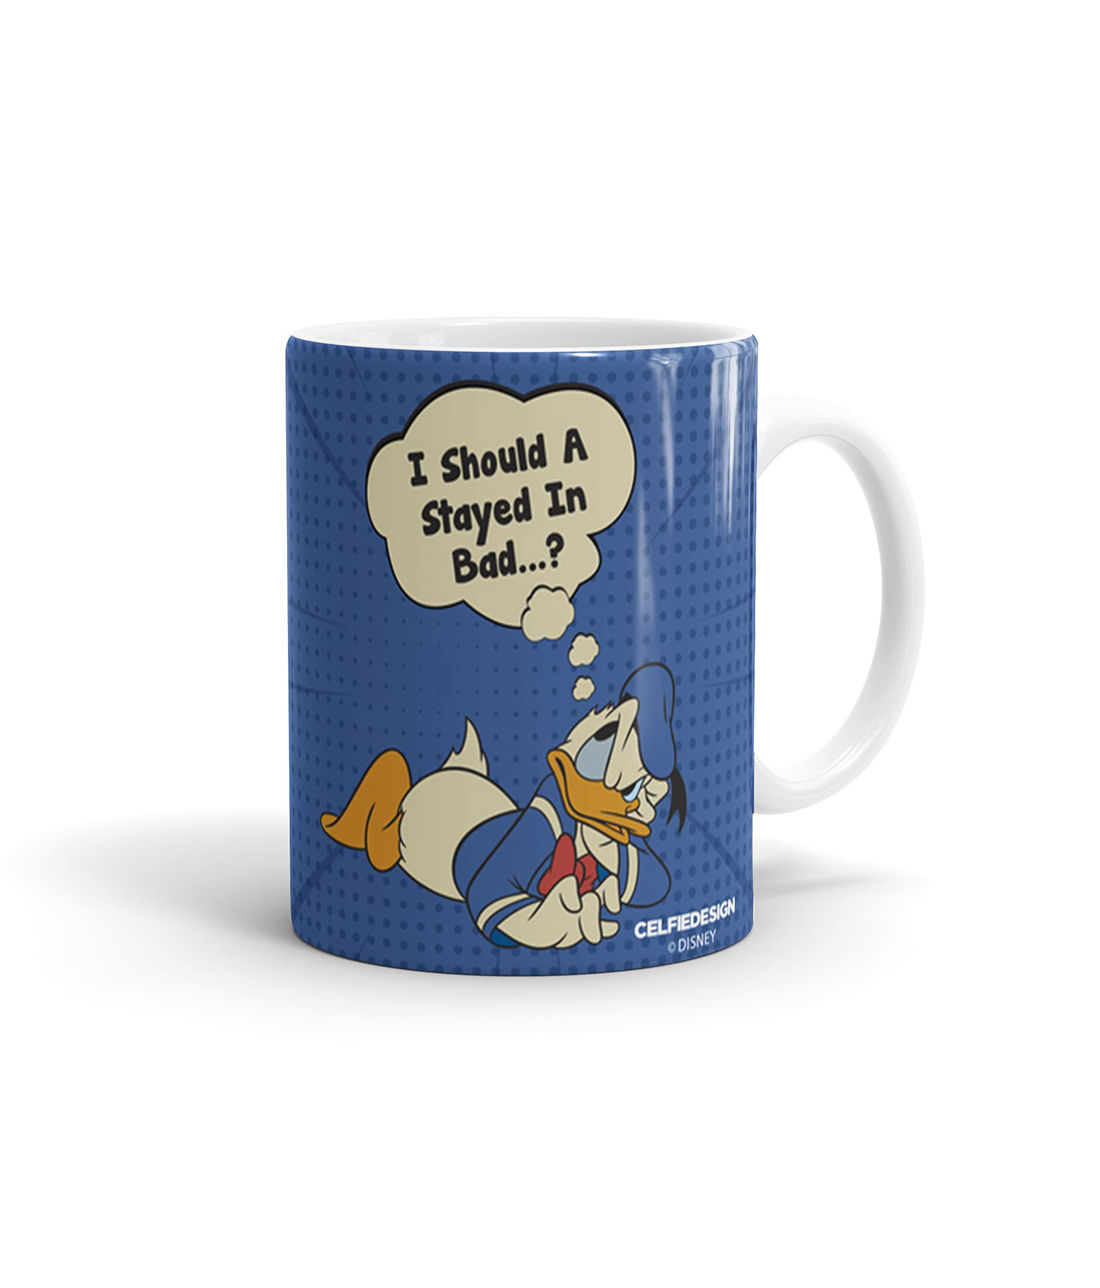 Buy Donald Stayed in Bad - Coffee Mugs White Coffee Mugs Online